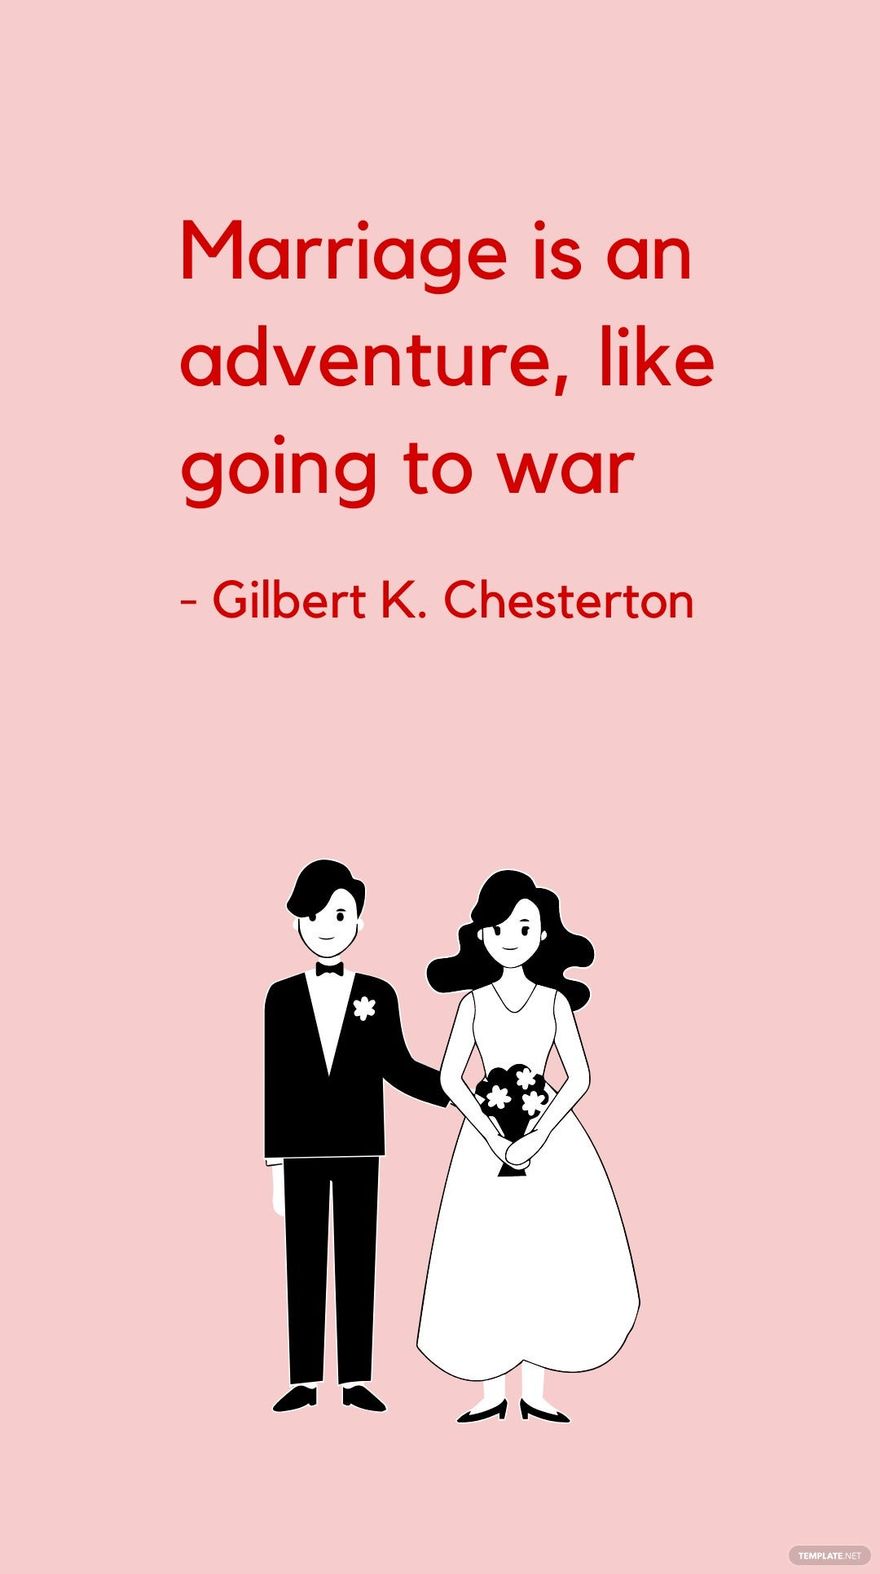 Gilbert K. Chesterton - Marriage is an adventure, like going to war